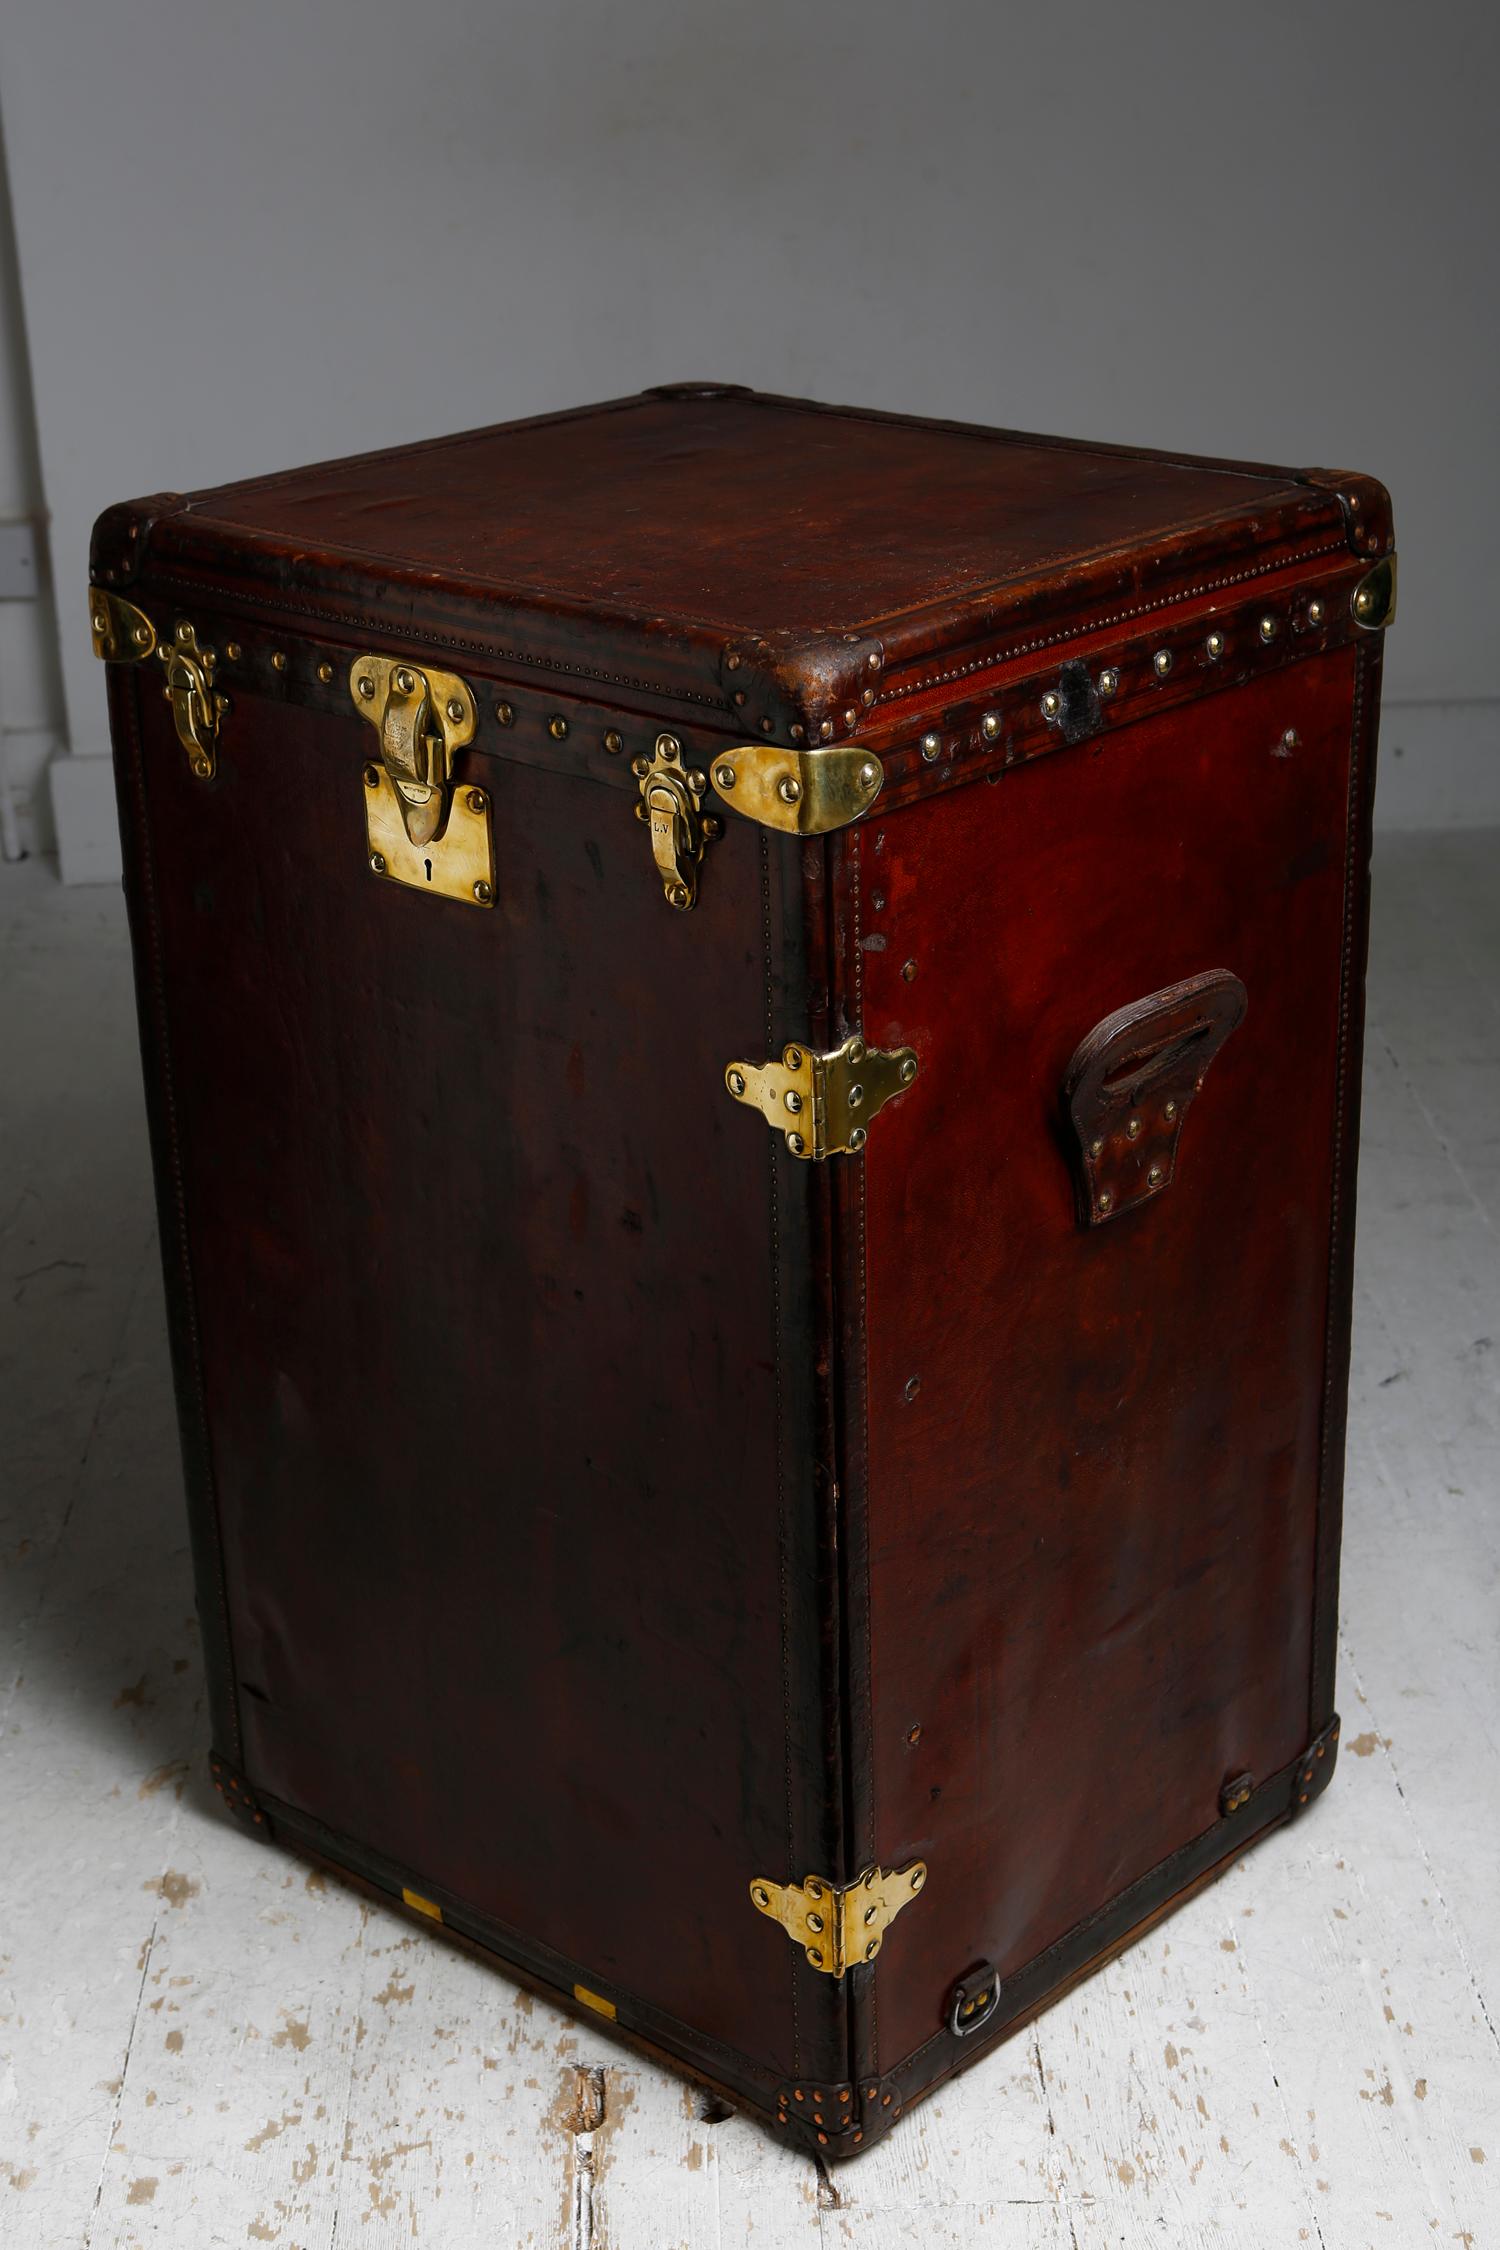 Edwardian Louis Vuitton Ladies Lingerie Desk Trunk in Orange with Mahogany Finish, 1914 For Sale